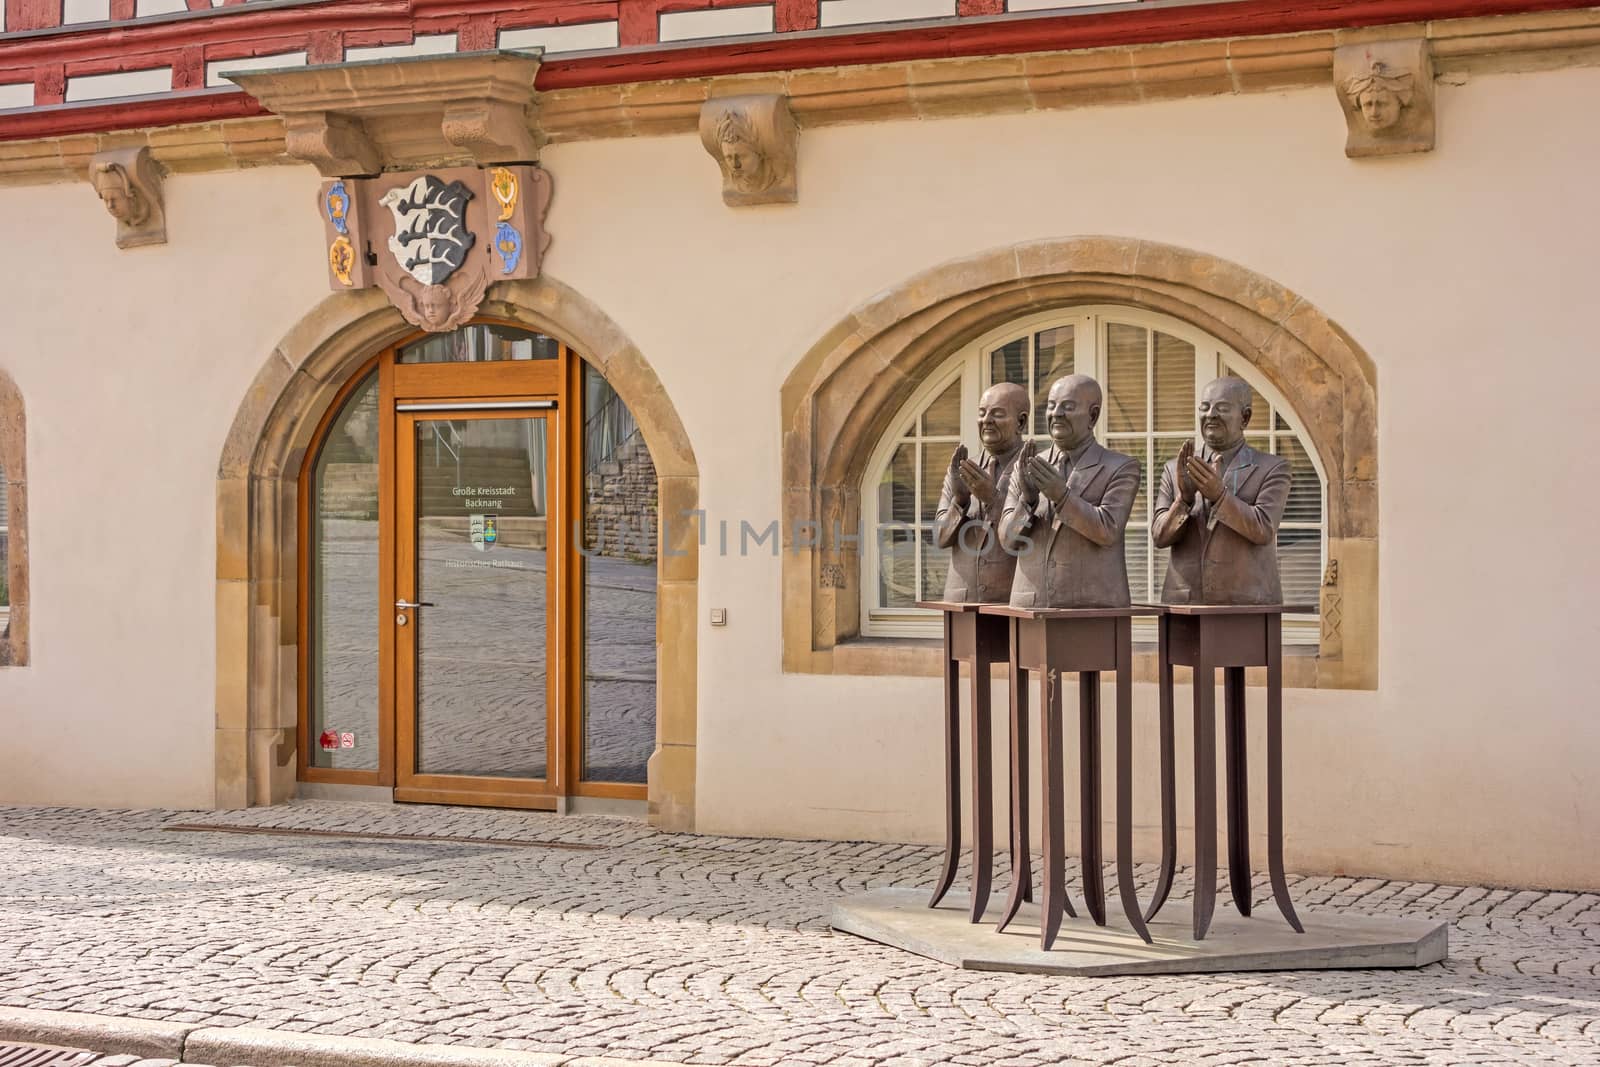 Backnang, Germany - April 3, 2016: Historical townhall entrance with sculpture on the right